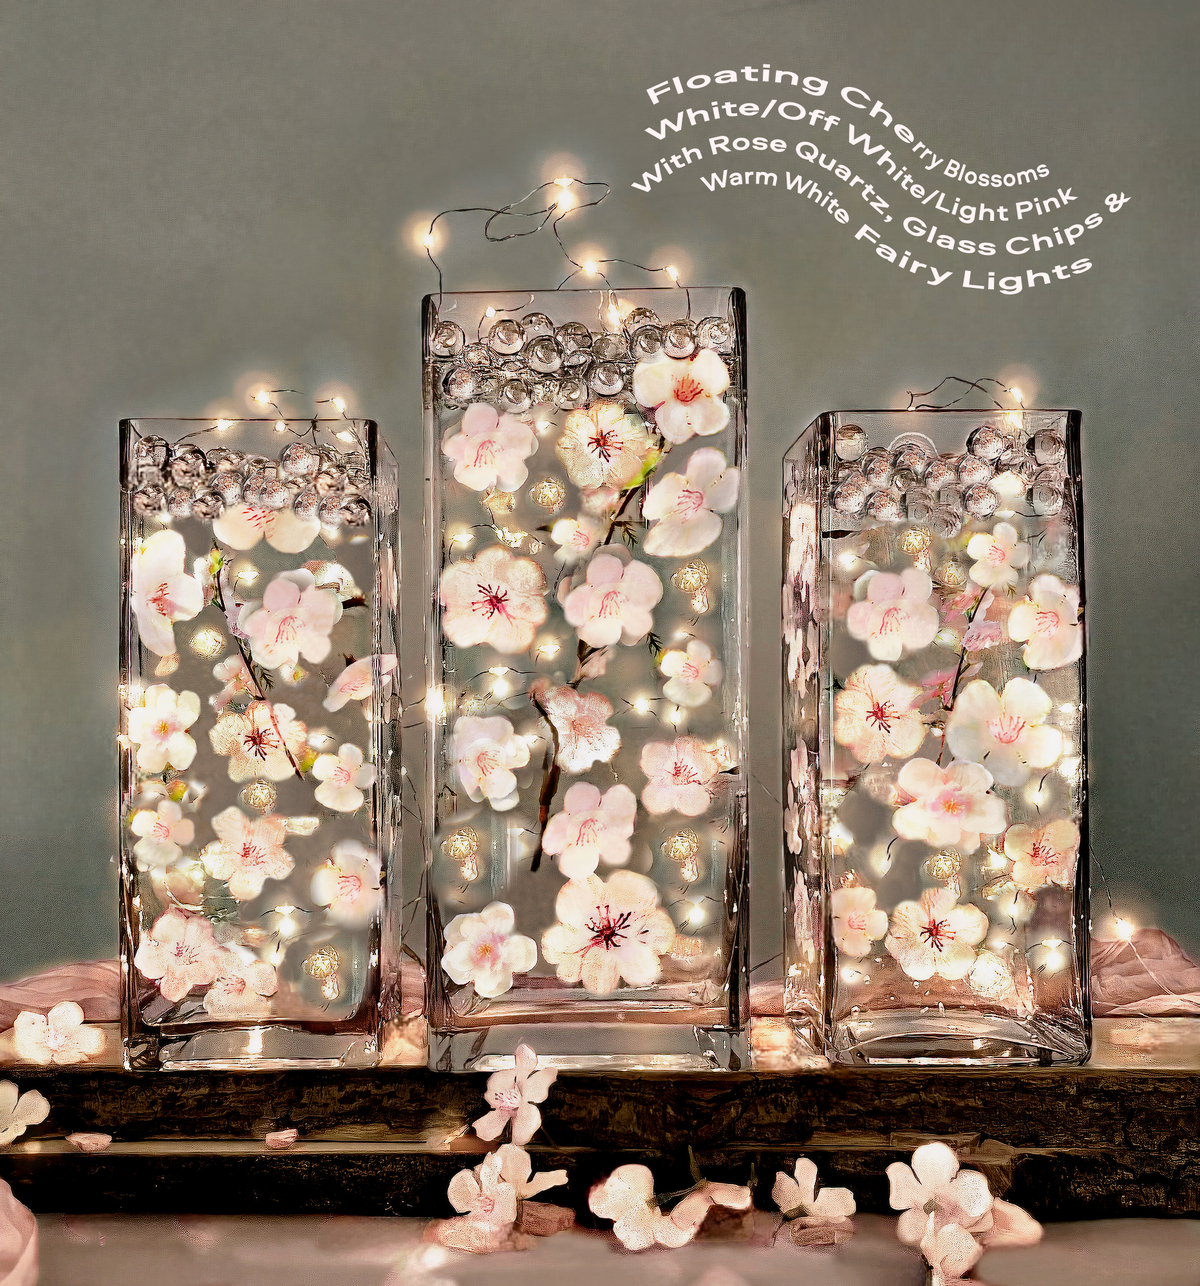 60 Floating White/Off White/Pink Cherry Blossoms Flowers with Matching Chipped Glass or Pearls-Fills 1 Gallon for Your vases-With Measured Floating Kit-Option:3 Submersible Fairy Lights-Vase Decorations